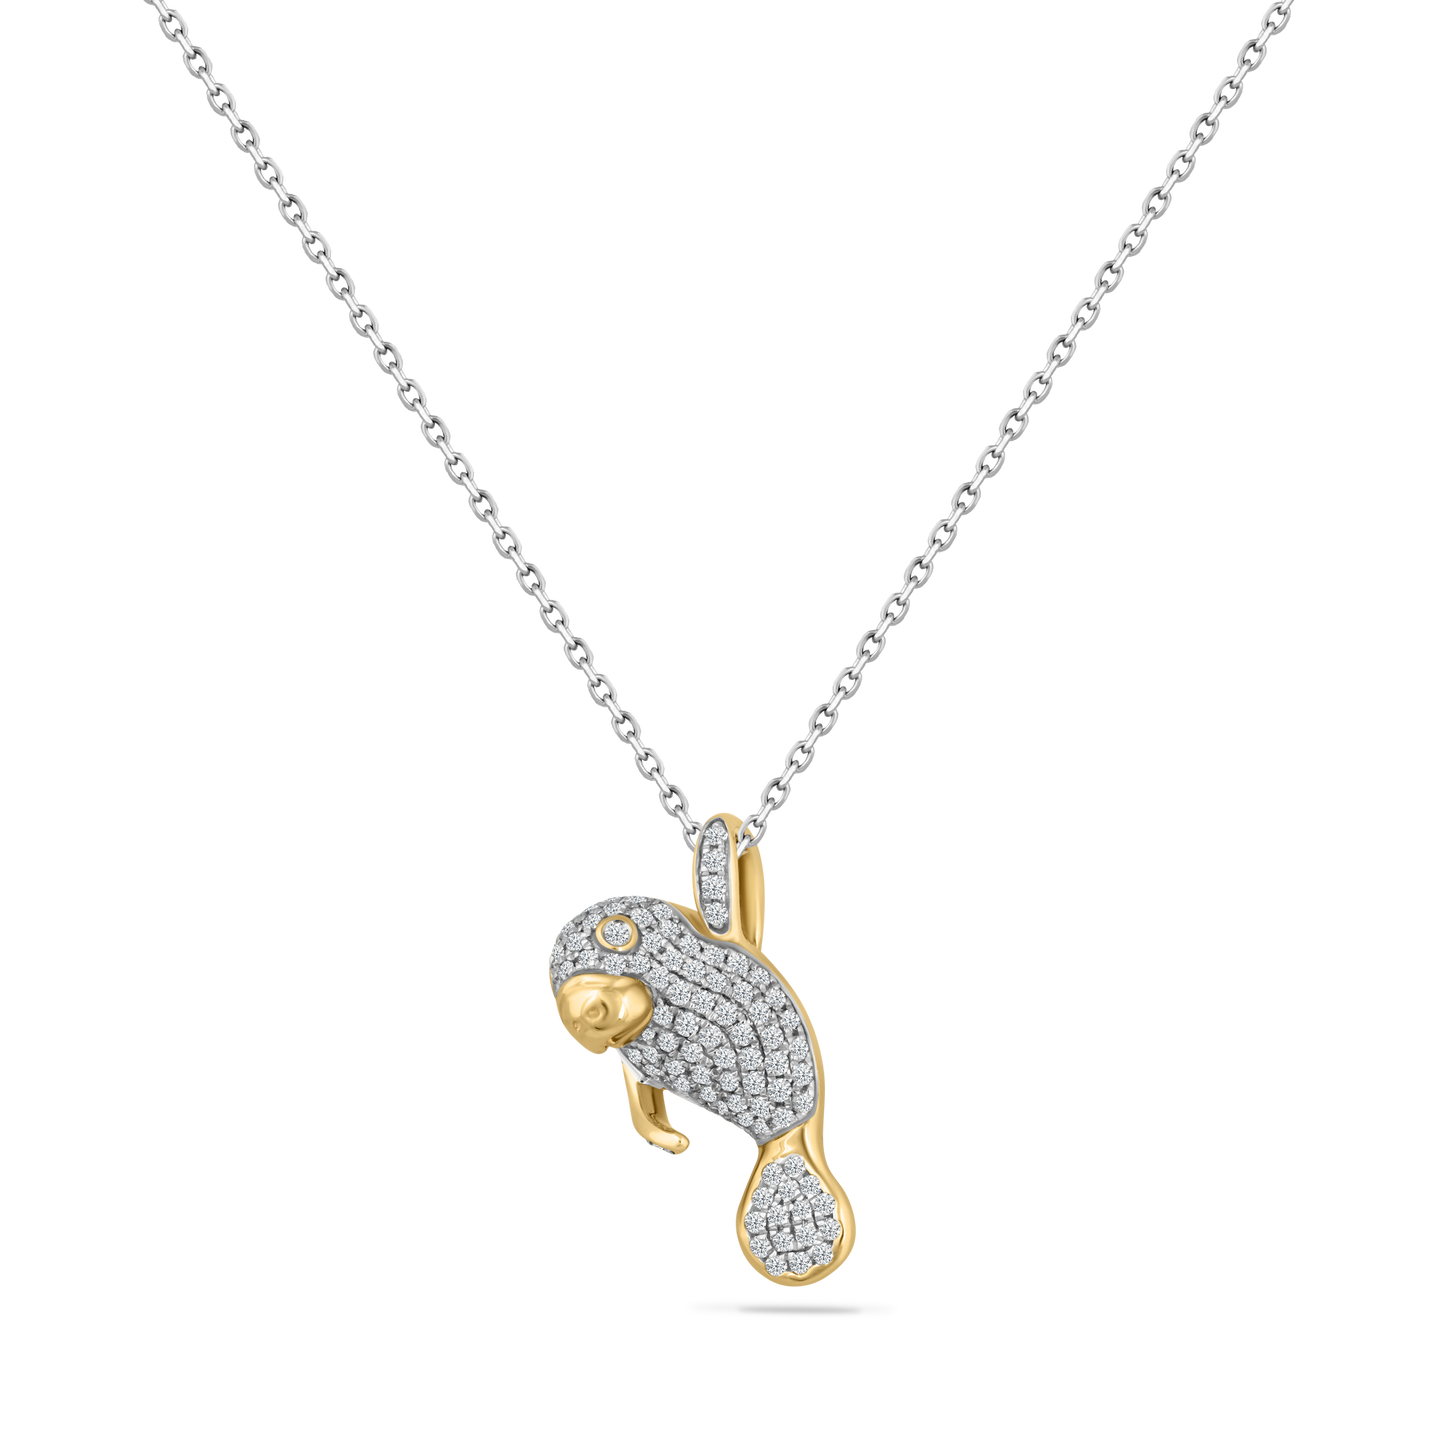 14K PAVE MANATEE PENDANT WITH 105 DIAMONDS 0.33CT ON 18 INCHES CHAIN